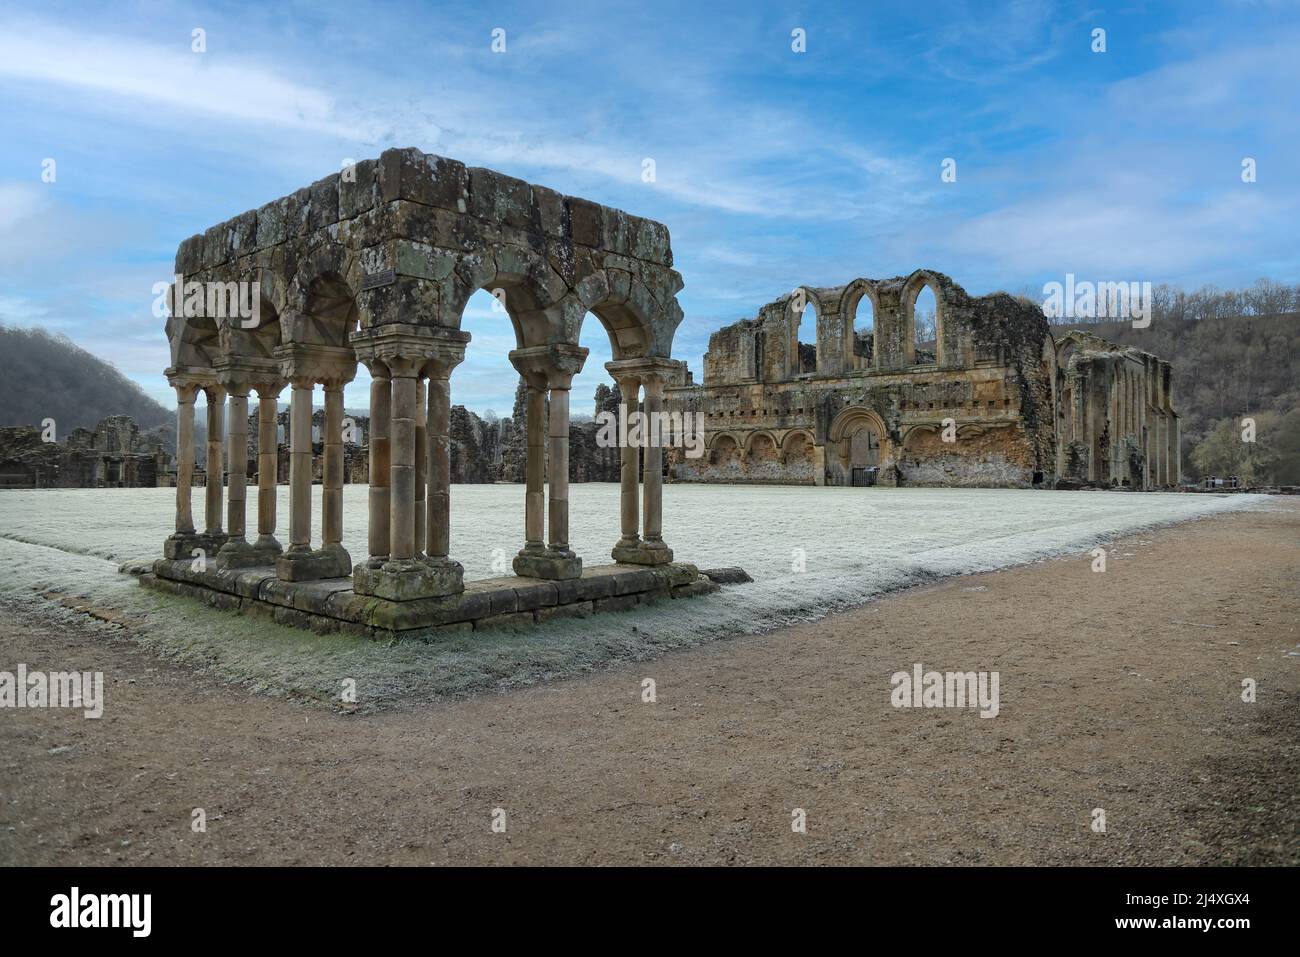 Recreated arcade (foreground) in the cloister with 'laver' (washing) facility behind in the arcade wall  of ruined Rievaulx Cistercian Abbey Stock Photo